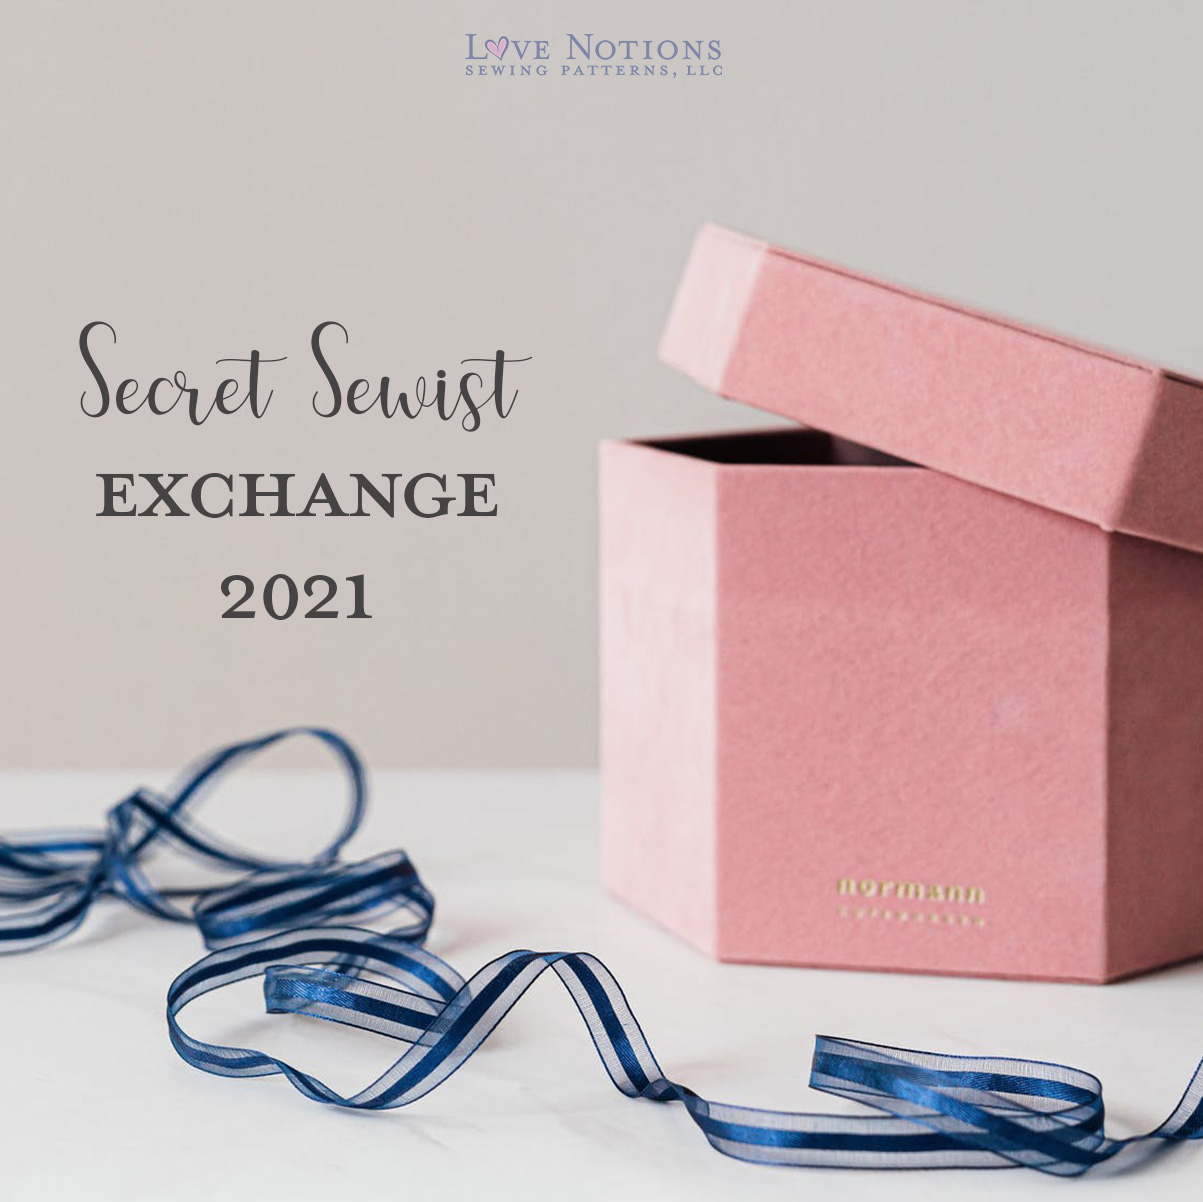 Sewing Craft Kits: gift ideas for sewists